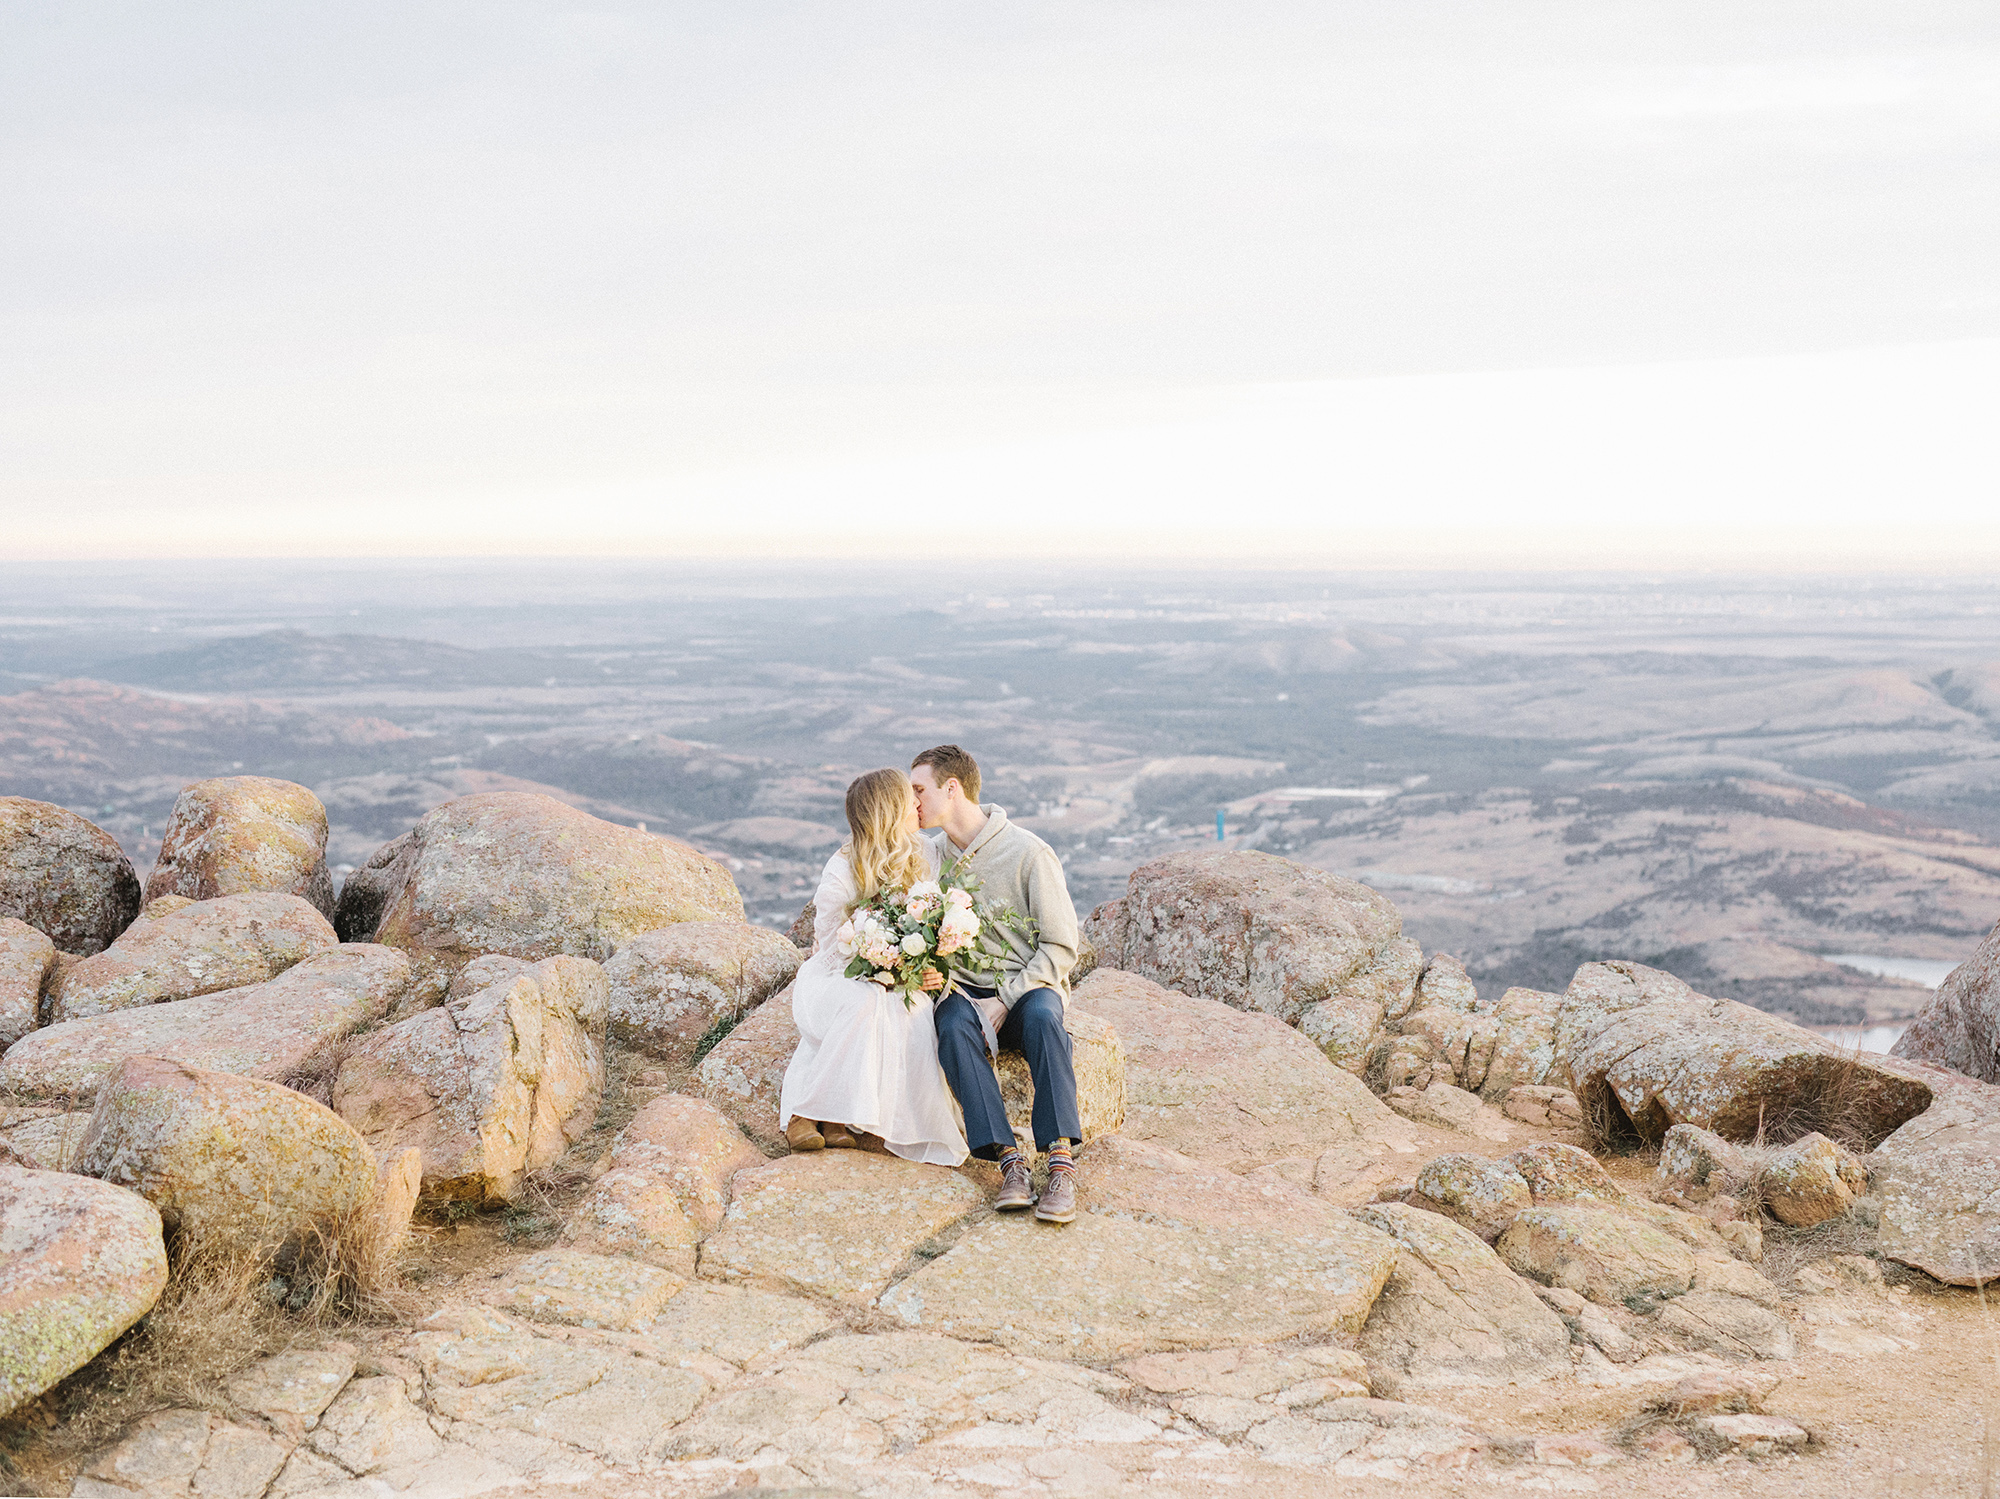 Beautiful views from this Mount Scott engagement session